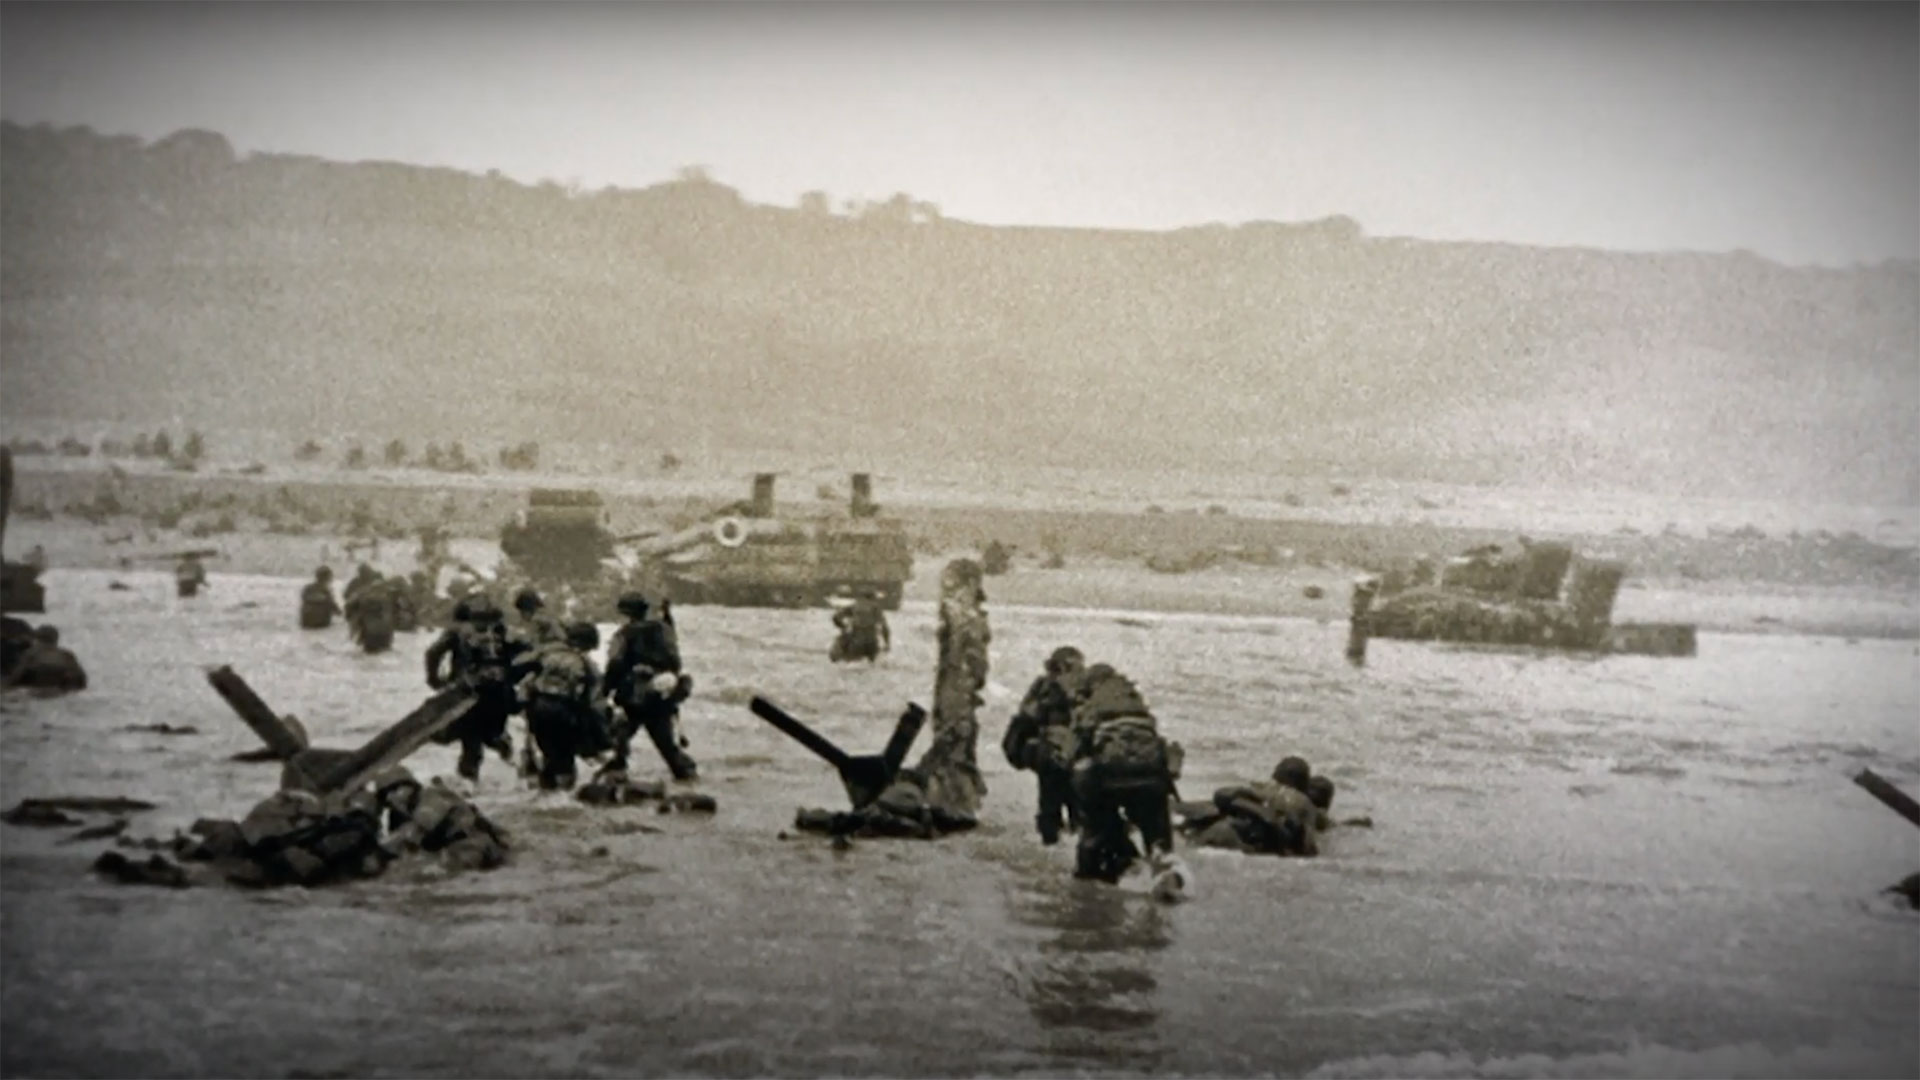 Men wading ashore at Omaha, with a clearer picture of the scene of chaos unfolding on the beach.